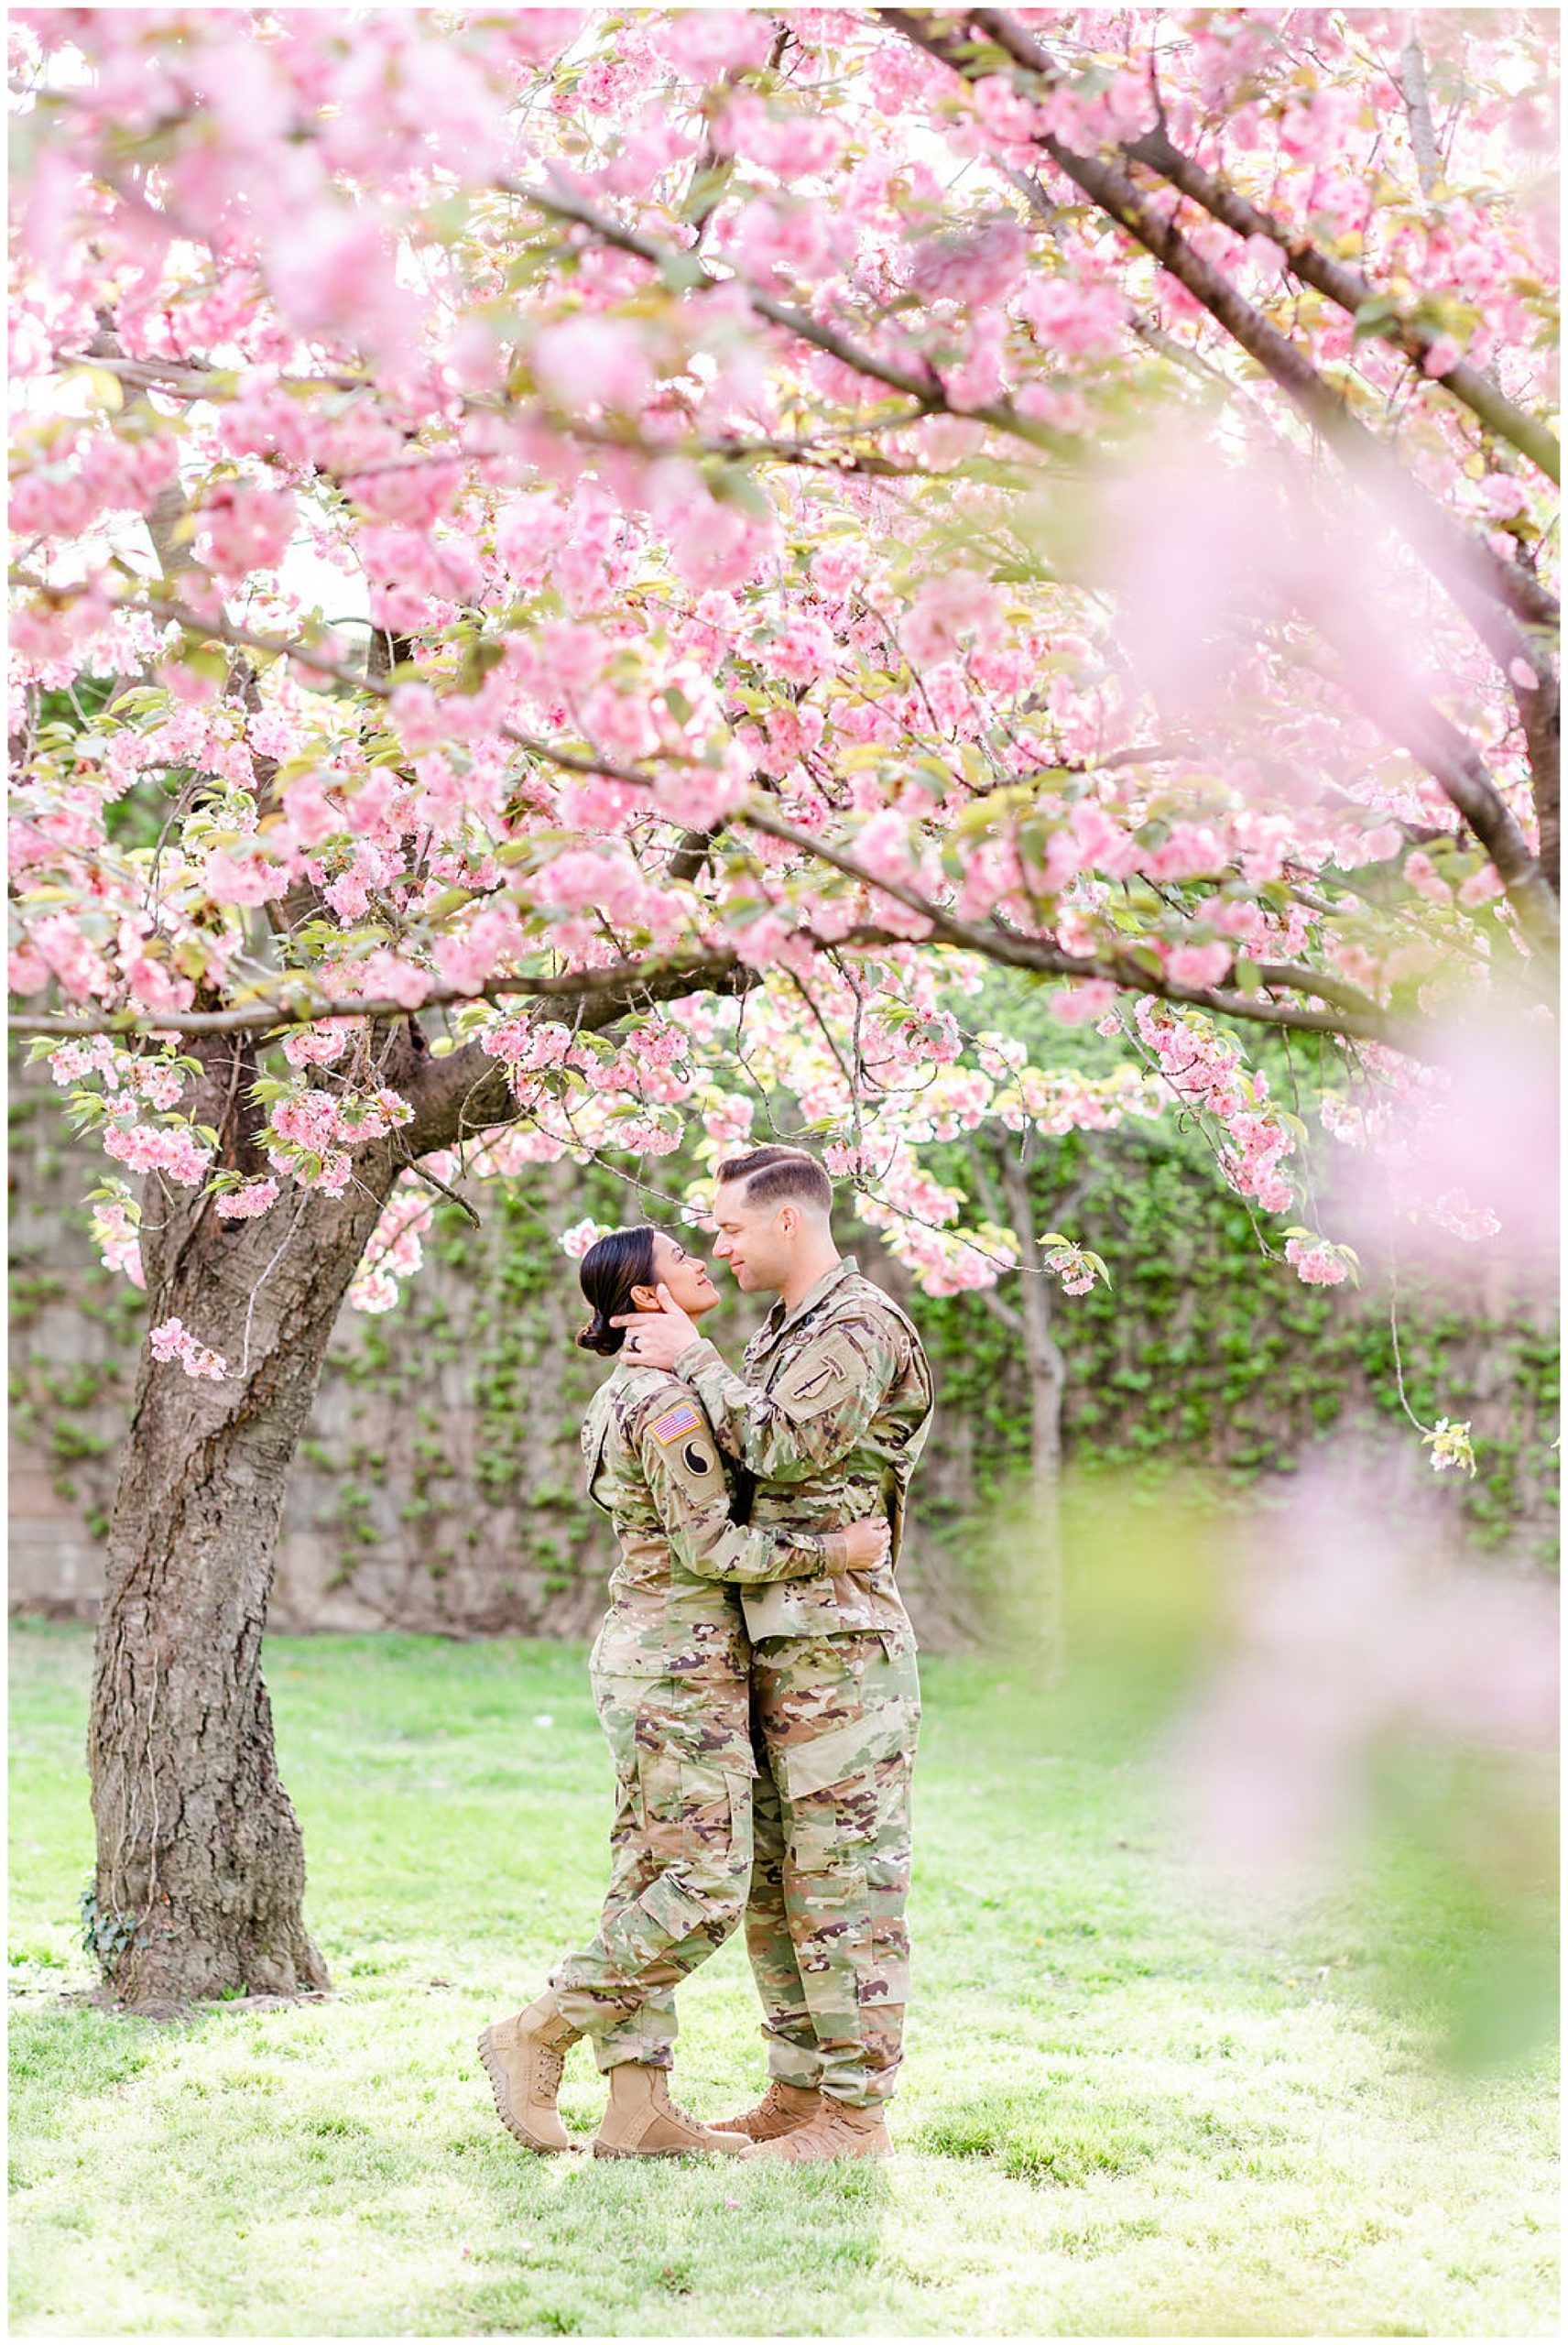 kwanzan cherry blossom portraits, Army couple, D.C. cherry blossom portraits, love birds, romantic portraits, couple goals, military couple, D.C. cherry blossoms photos, spring portraits, newlywed portraits, Rachel E.H. Photography, mans hand on womans cheek, couple with arms around each other